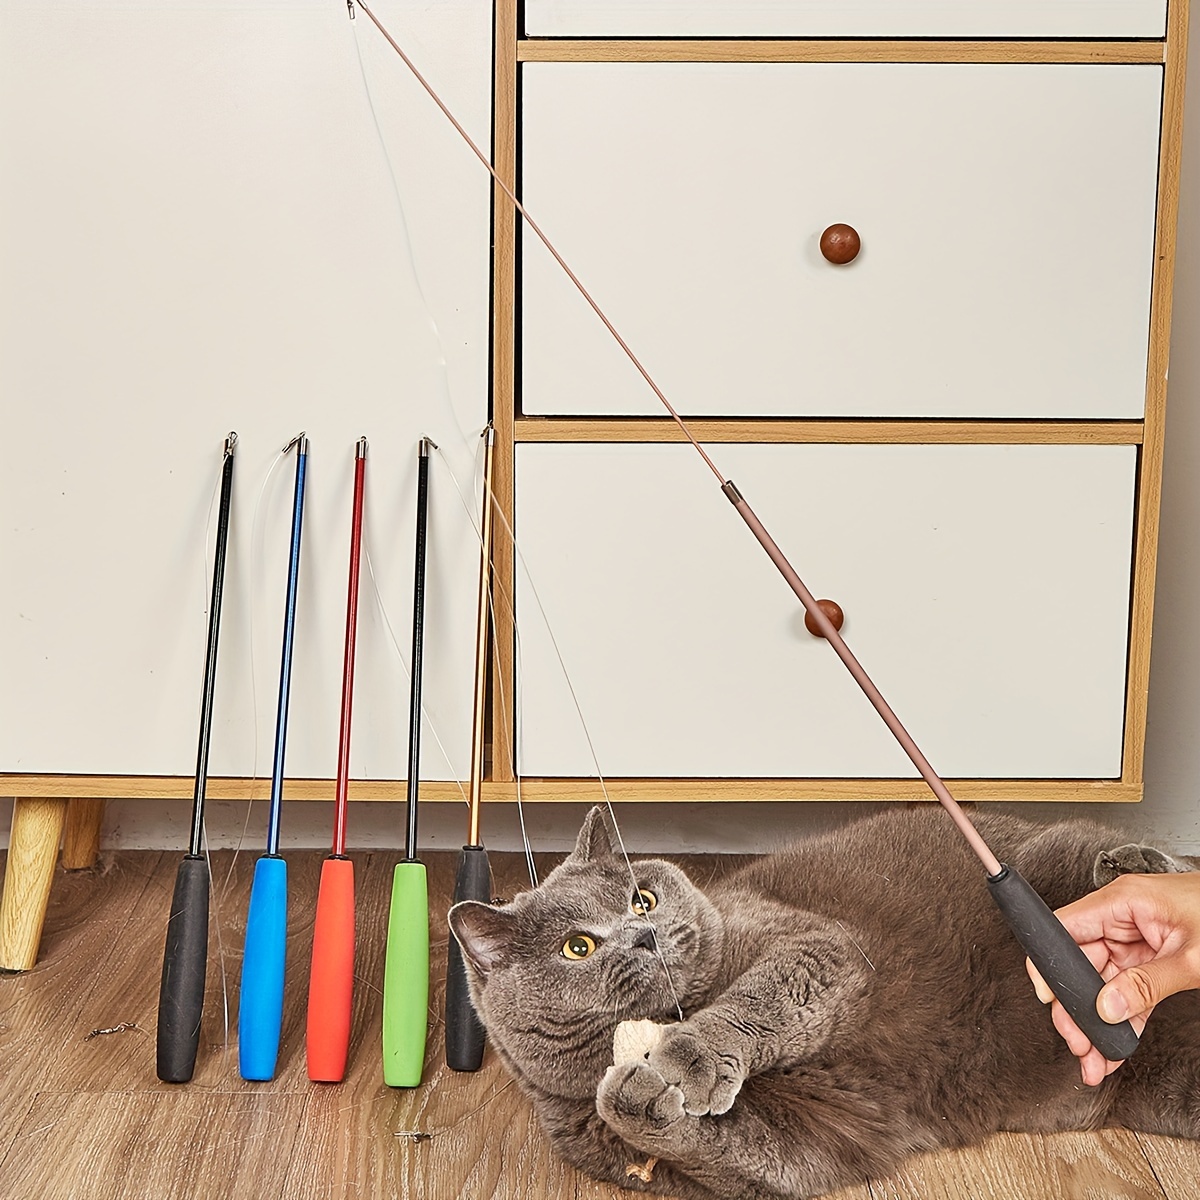 Telescopic Fishing Rod Cat Toy Catcher Exerciser Functional Easy to Use for